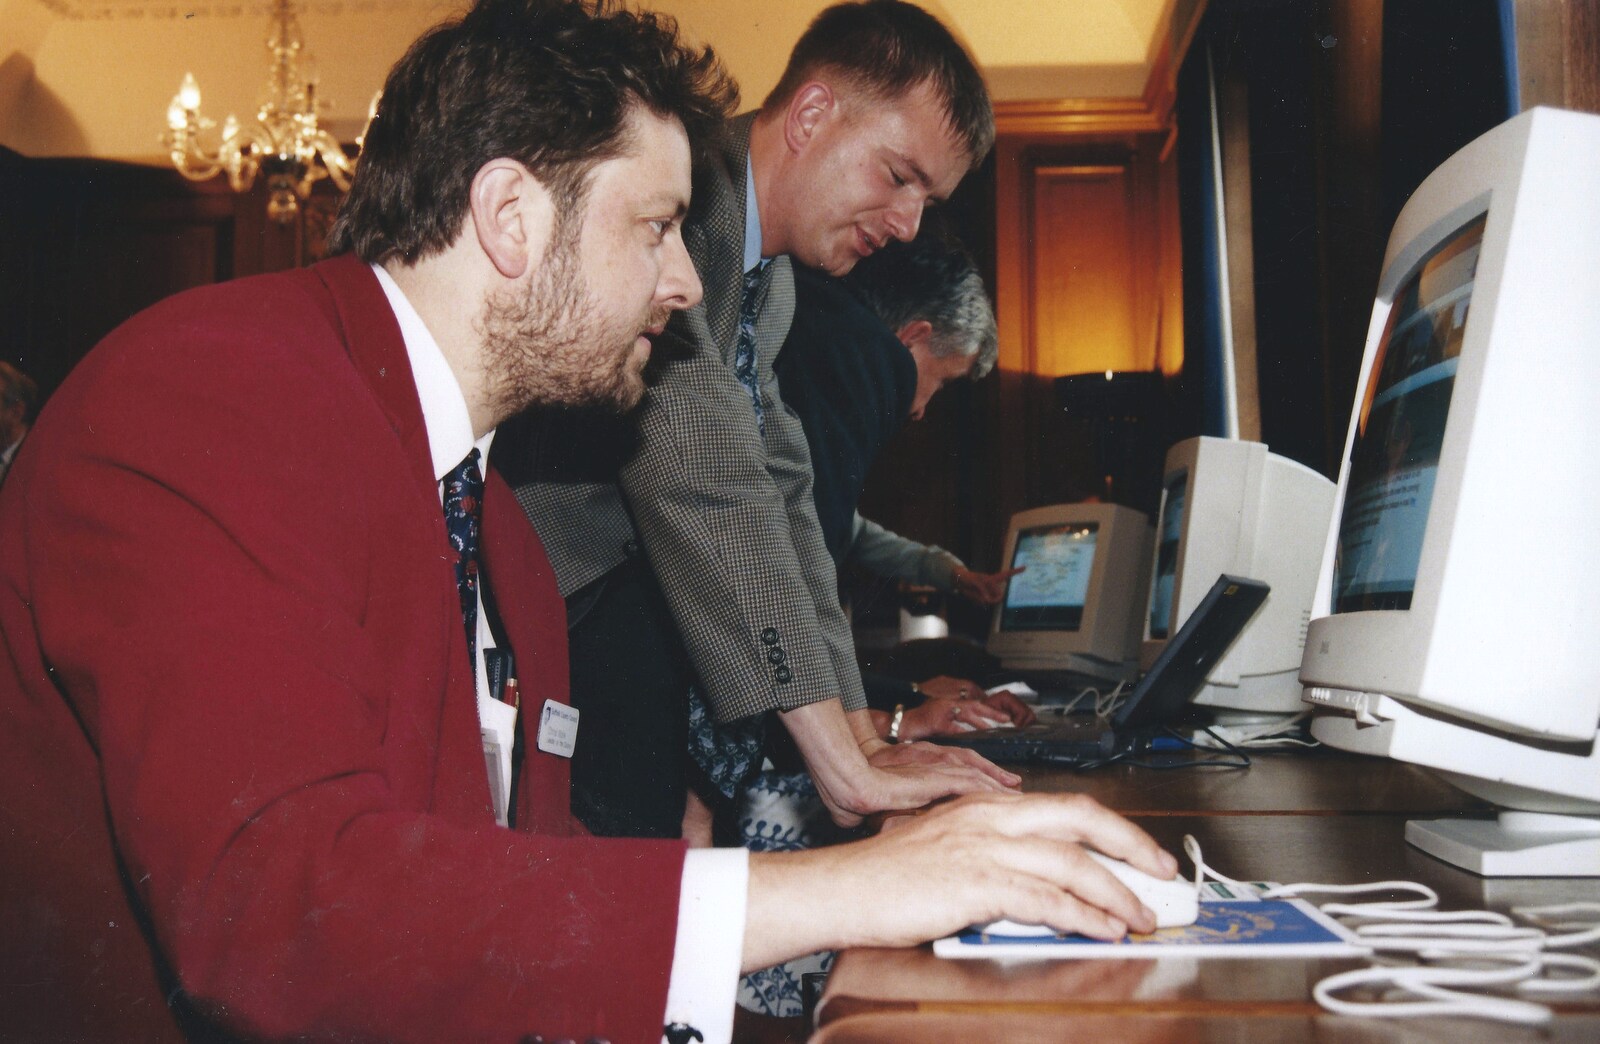 Chris Mole and Nosher at the Cyberlibrary launch from The CISU Awards Season, Suffolk County Council, Ipswich - 21st May 1998